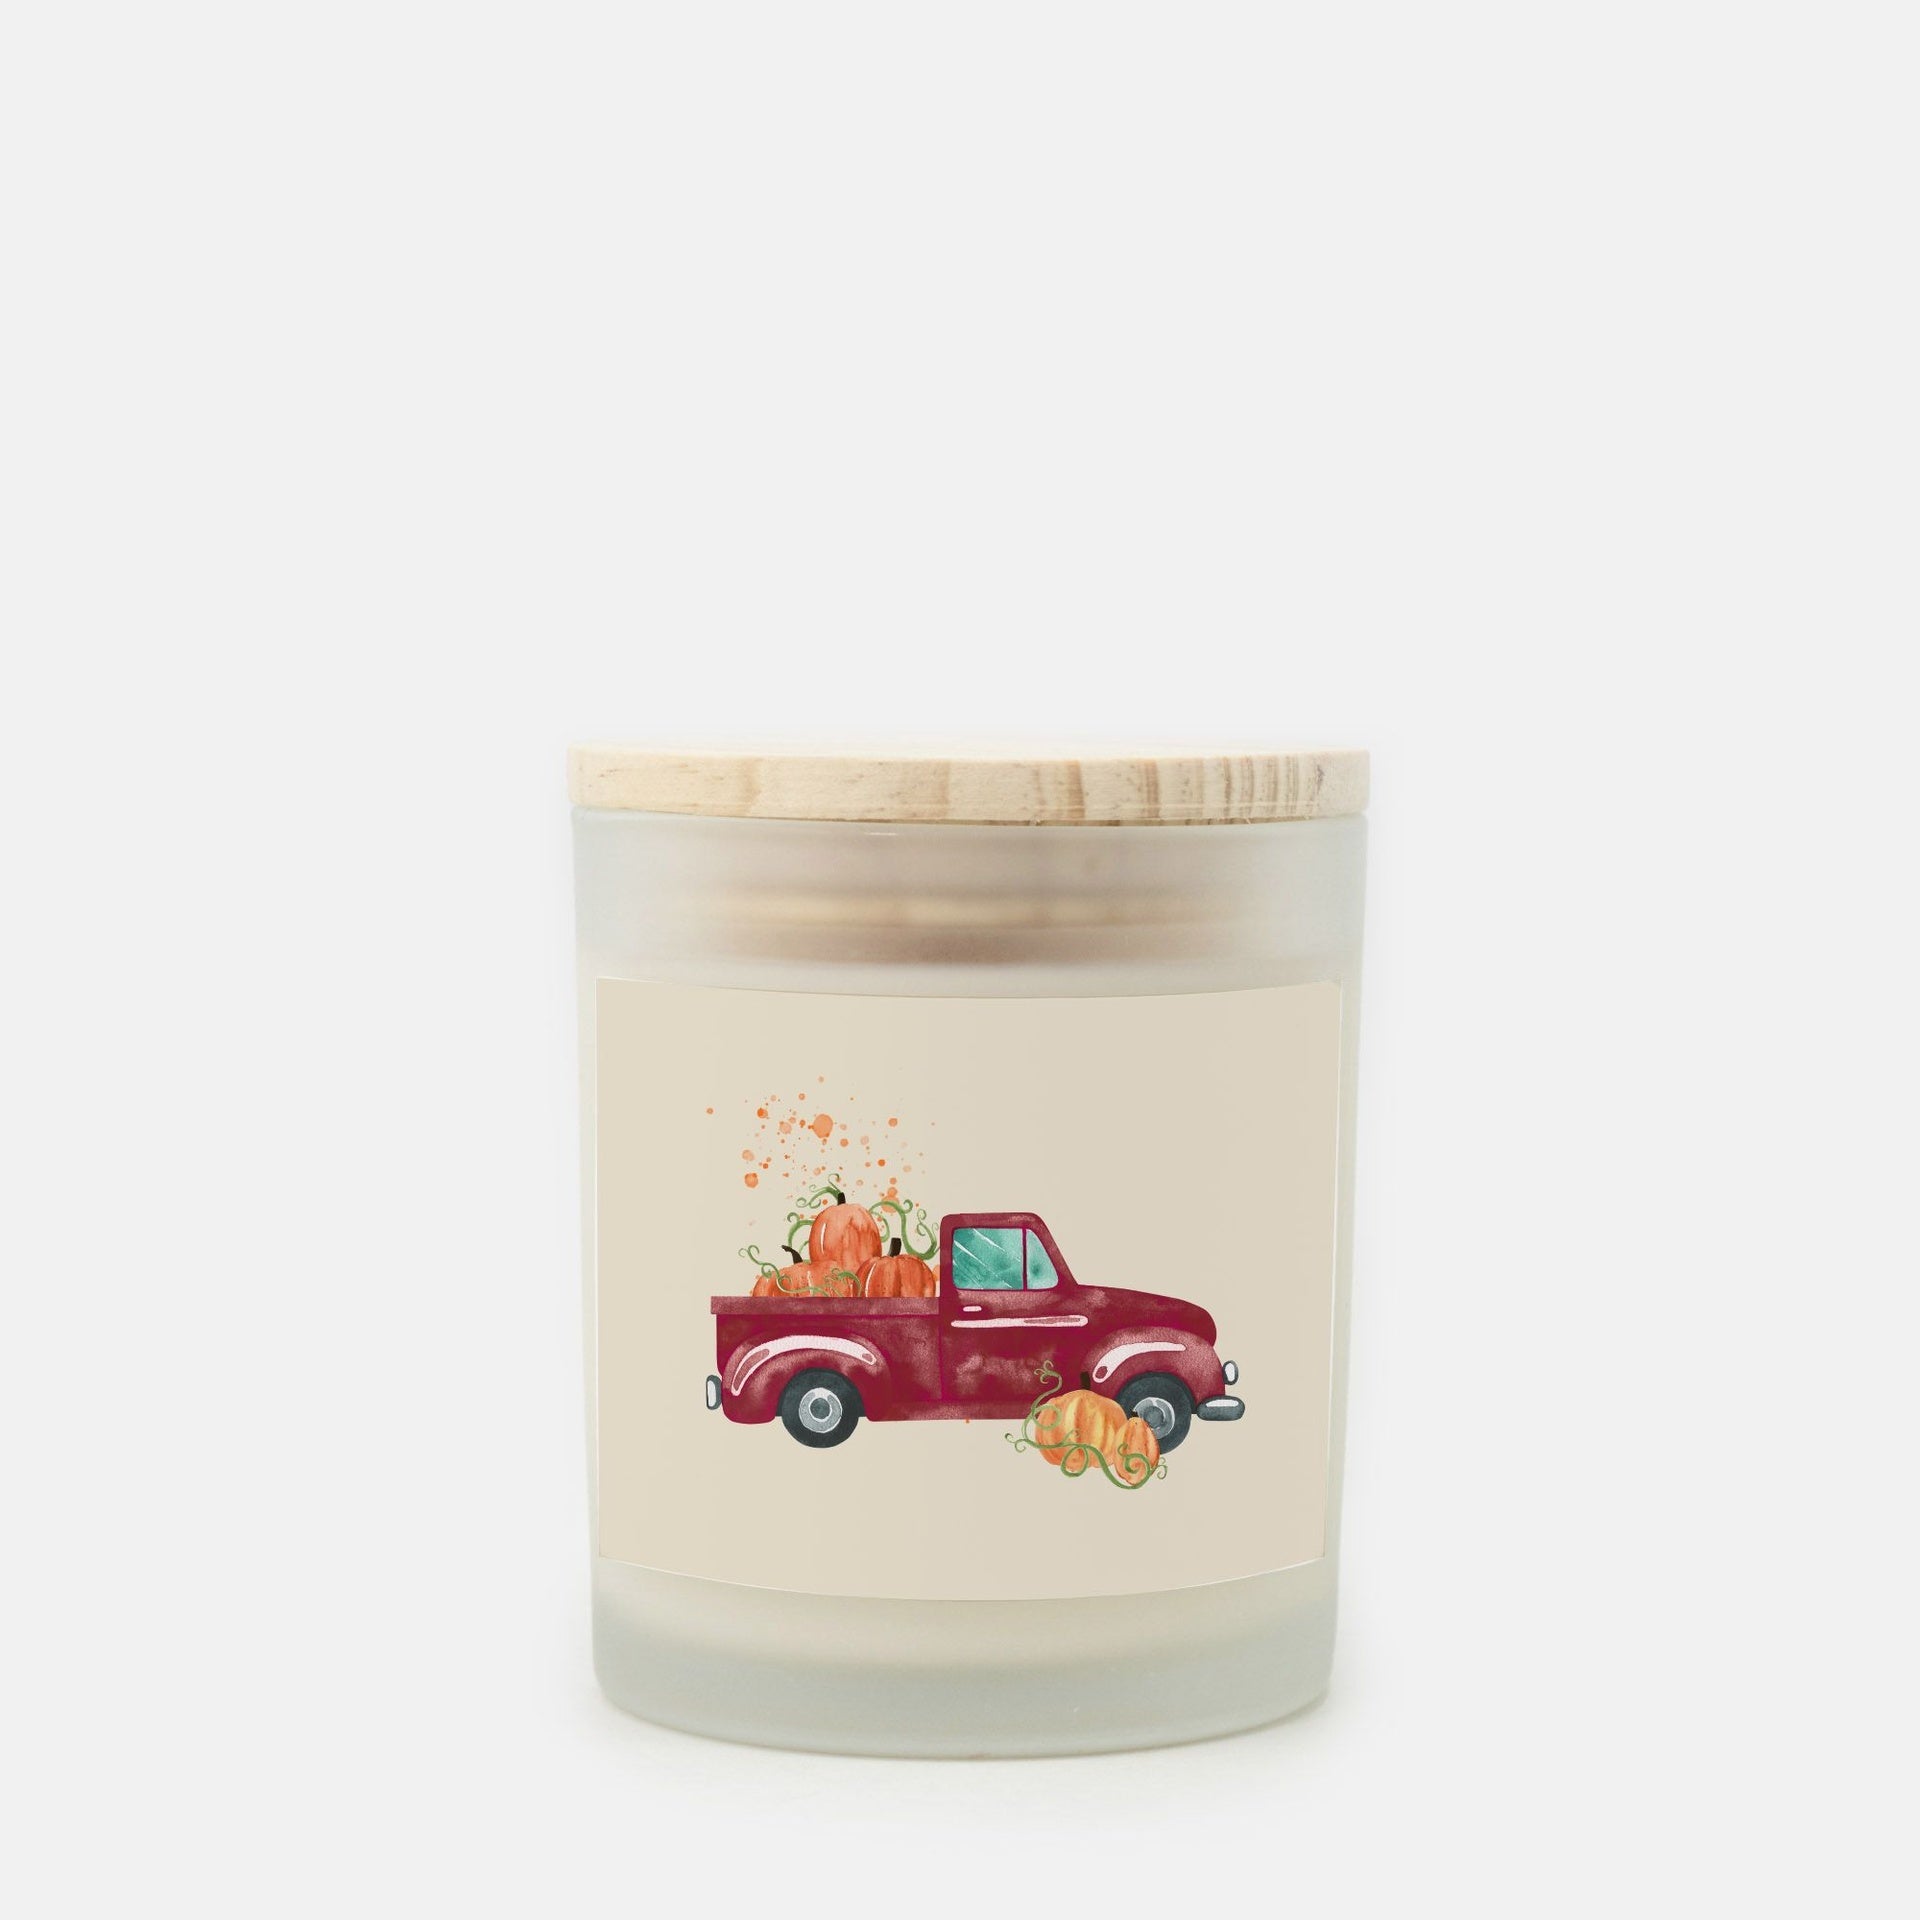 Lifestyle Details - 11oz Rustic Burgundy Truck Frosted Glass Candle - Cashmere Vanilla